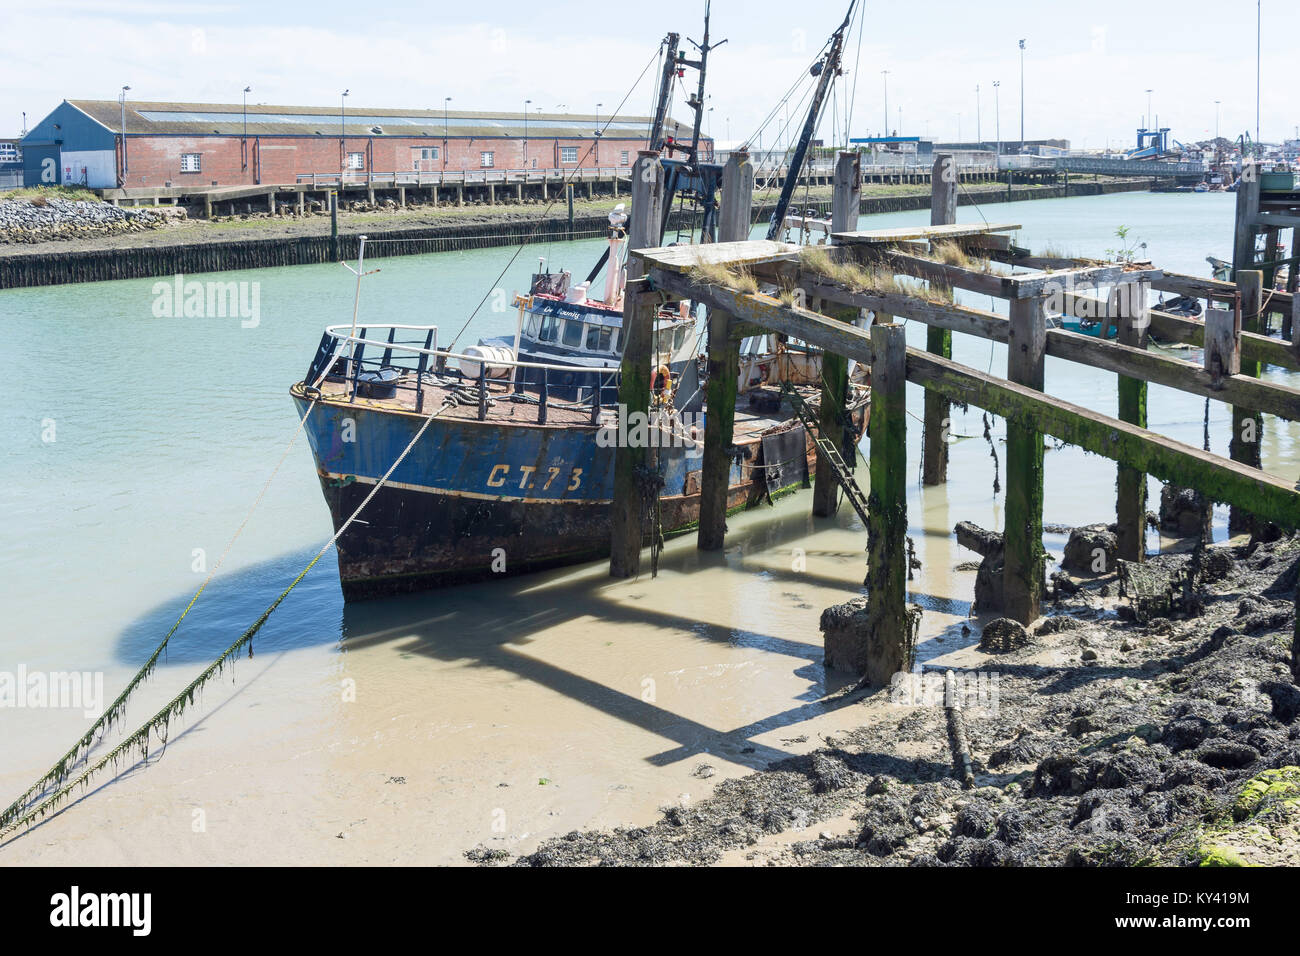 Old fishing boat moored on River Ouse, West Quay, Newhaven, East Sussex, England, United Kingdom Stock Photo